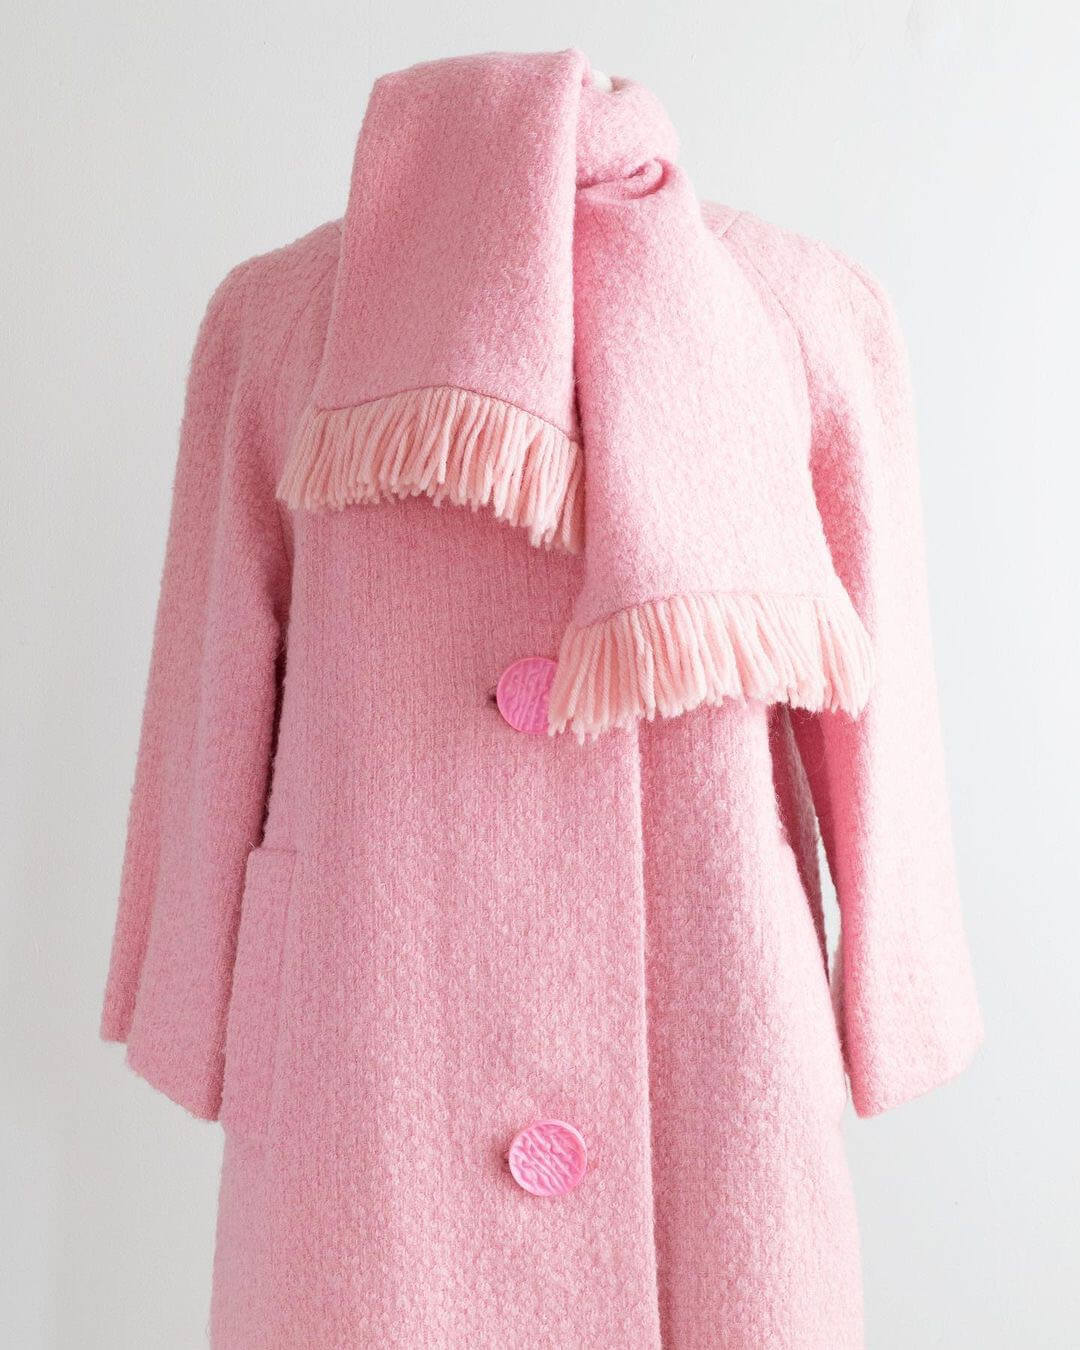 vintage pink wool coat from xtabay in portland, or